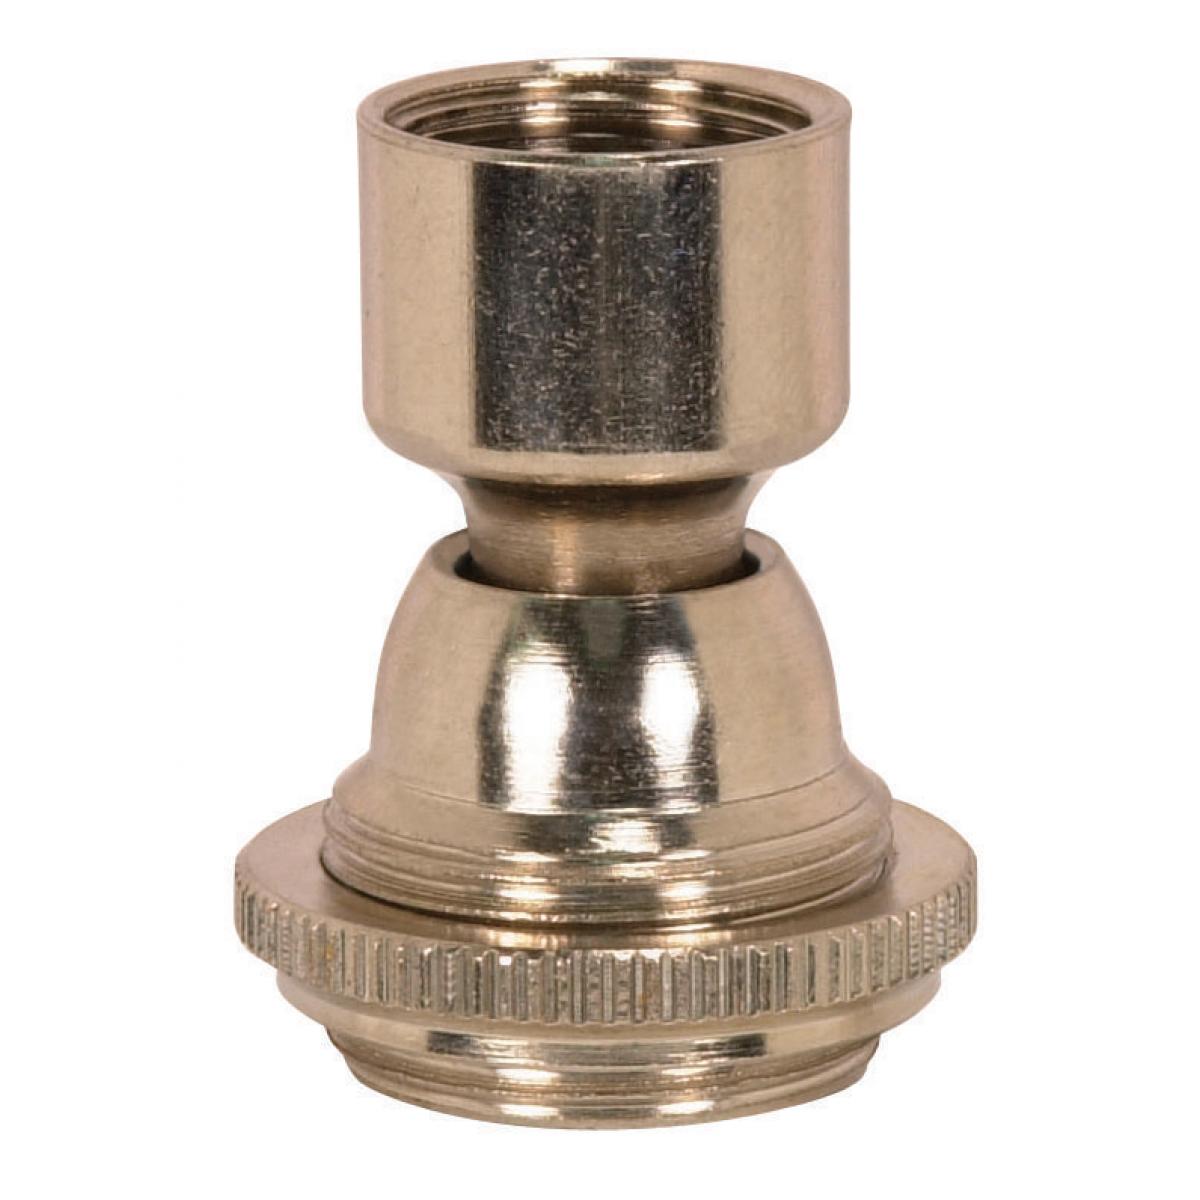 Satco 90-2337 Solid Brass Large Hang Straight Swivel 1/4 F Top And Bottom 1-1/16" Ring Nut To Seat 1-1/2" Height Barrel Nickel Finish